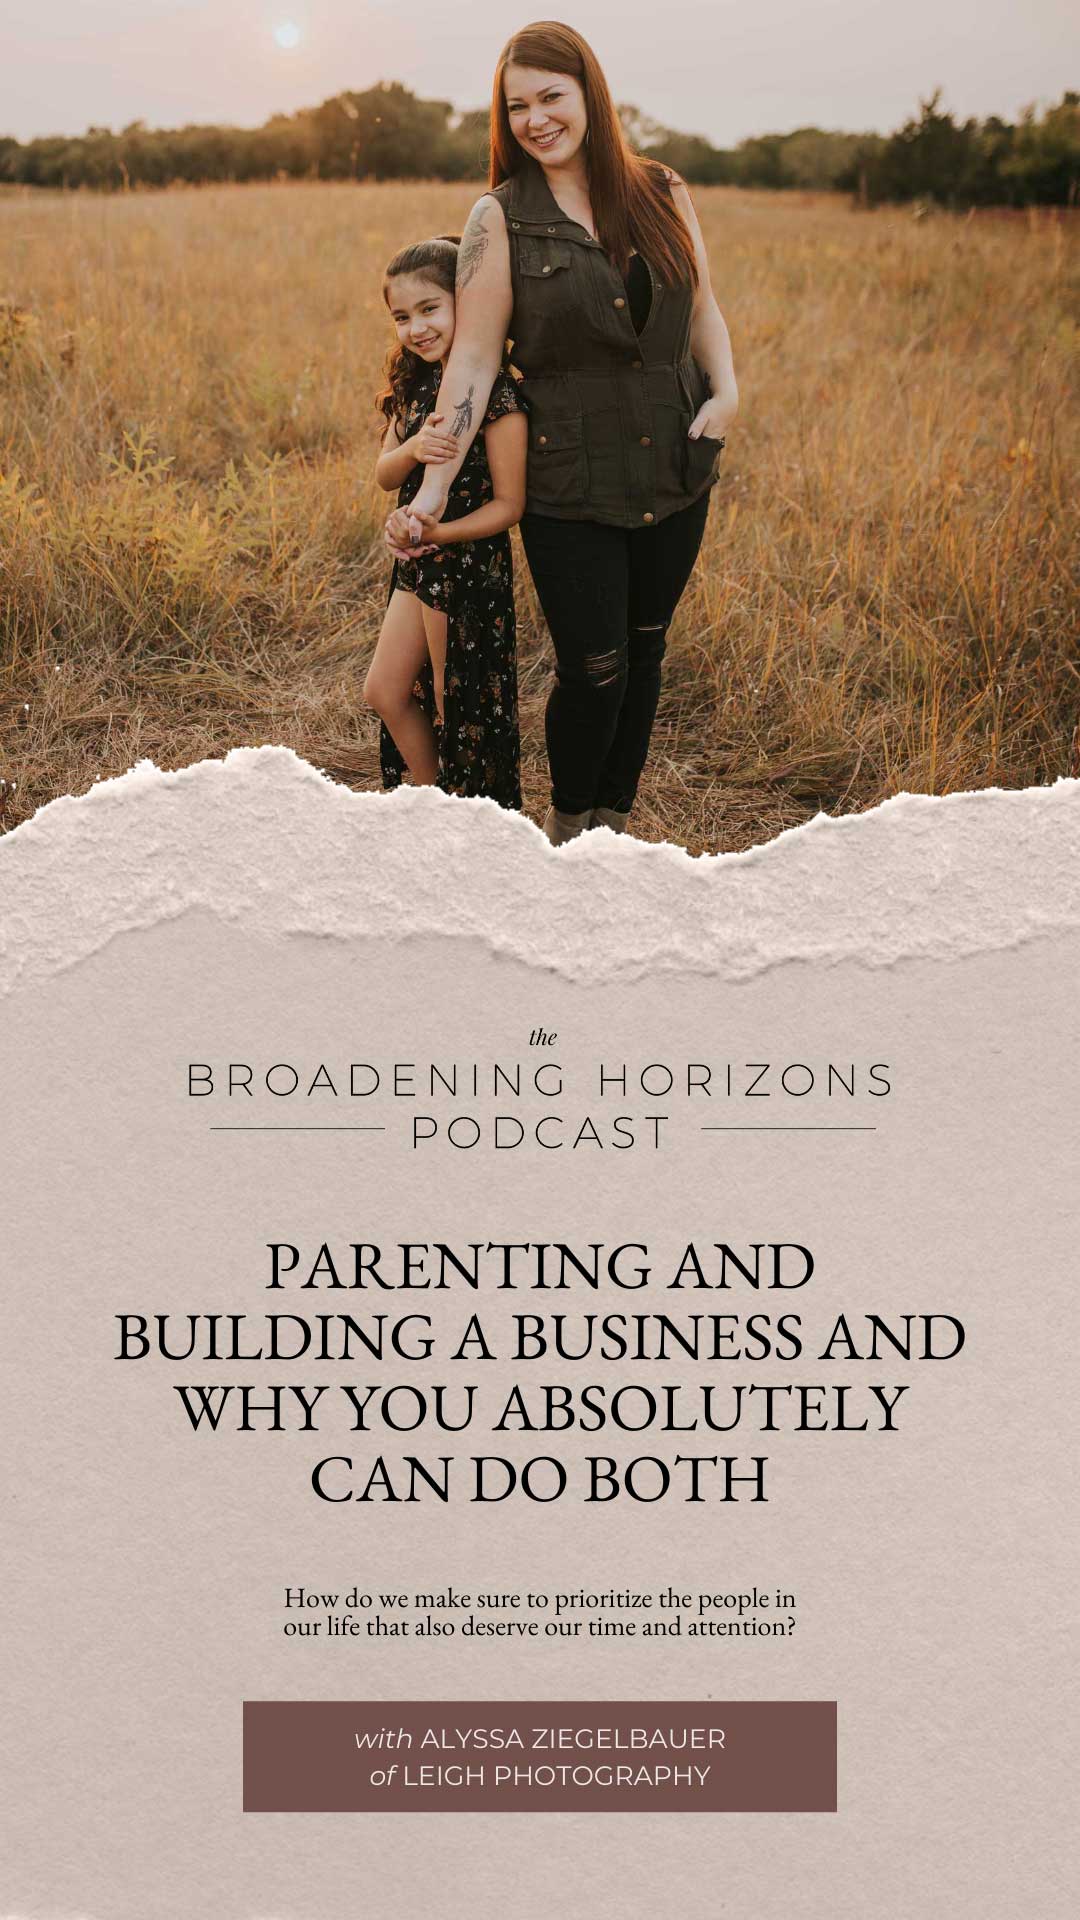 Parenting and Building a Business and Why You Absolutely Can Do Both with Alyssa Ziegelbauer of Leigh Photography from www.sweethorizonblog.com